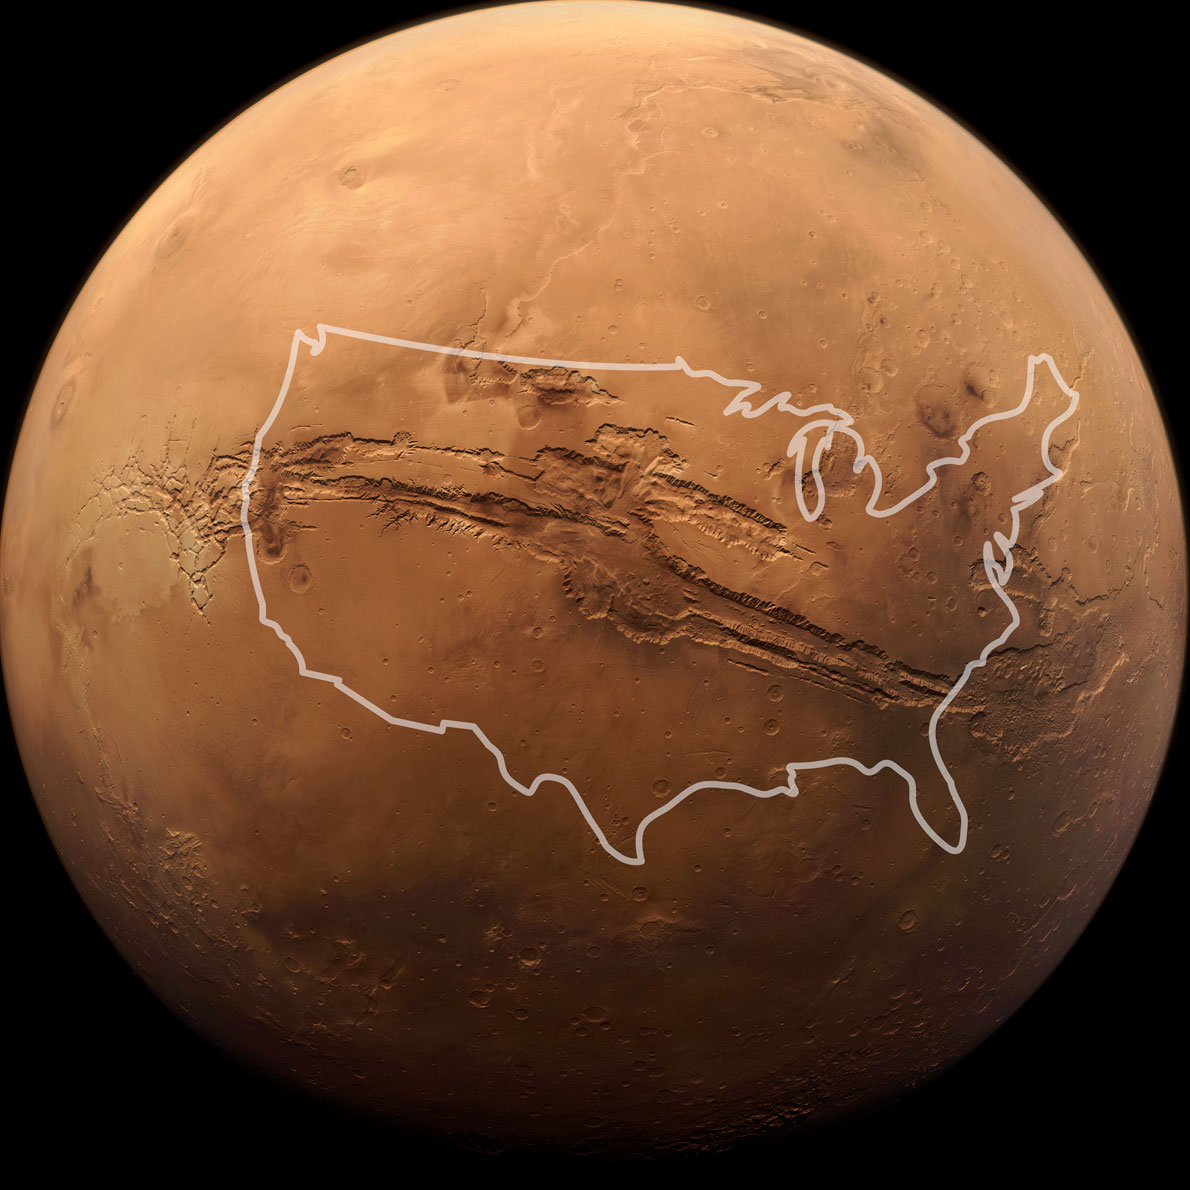 The planet Mars against a black background. An outline of the United States appears over the big canyon in the photo to show how big it is. The canyon appears longer than the United States.